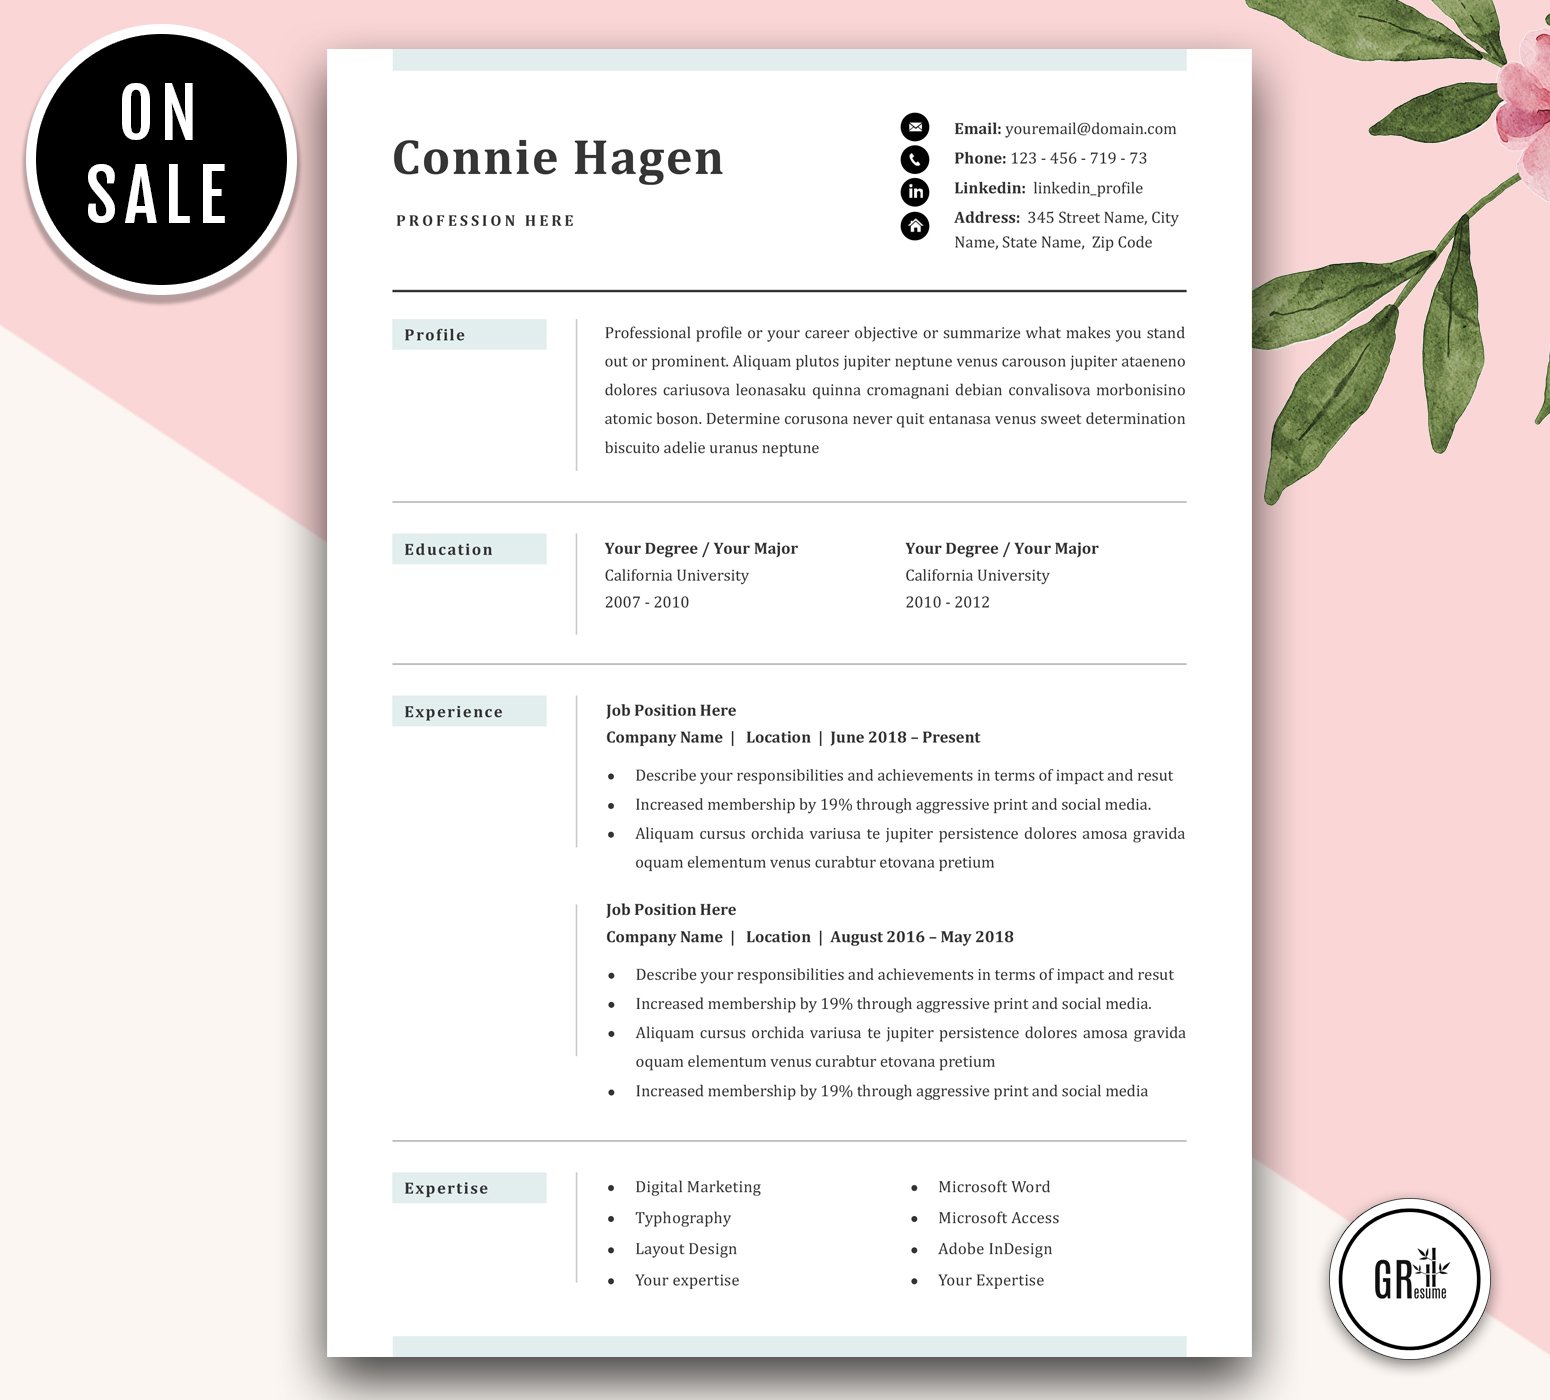 Resume Template for Word cover image.